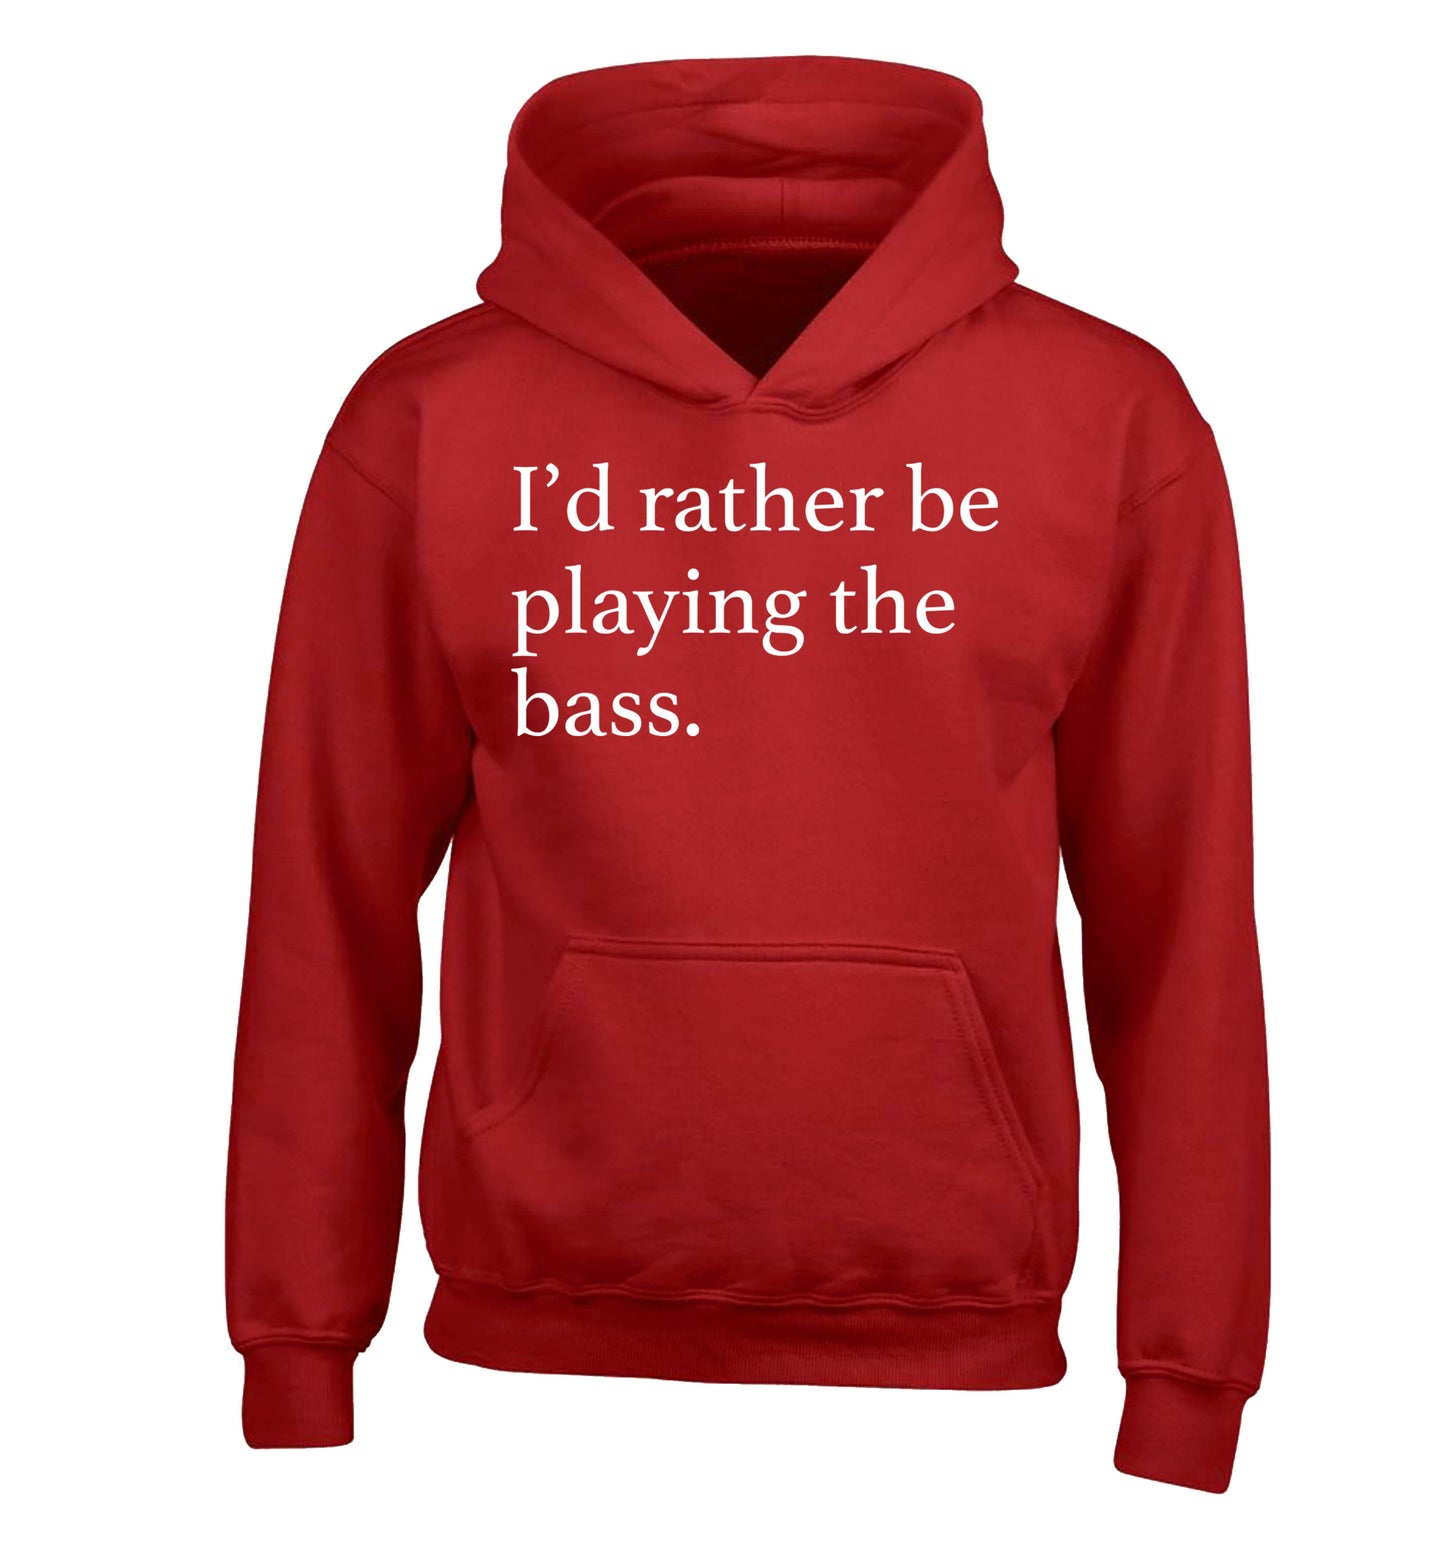 I'd rather by playing the bass children's red hoodie 12-14 Years